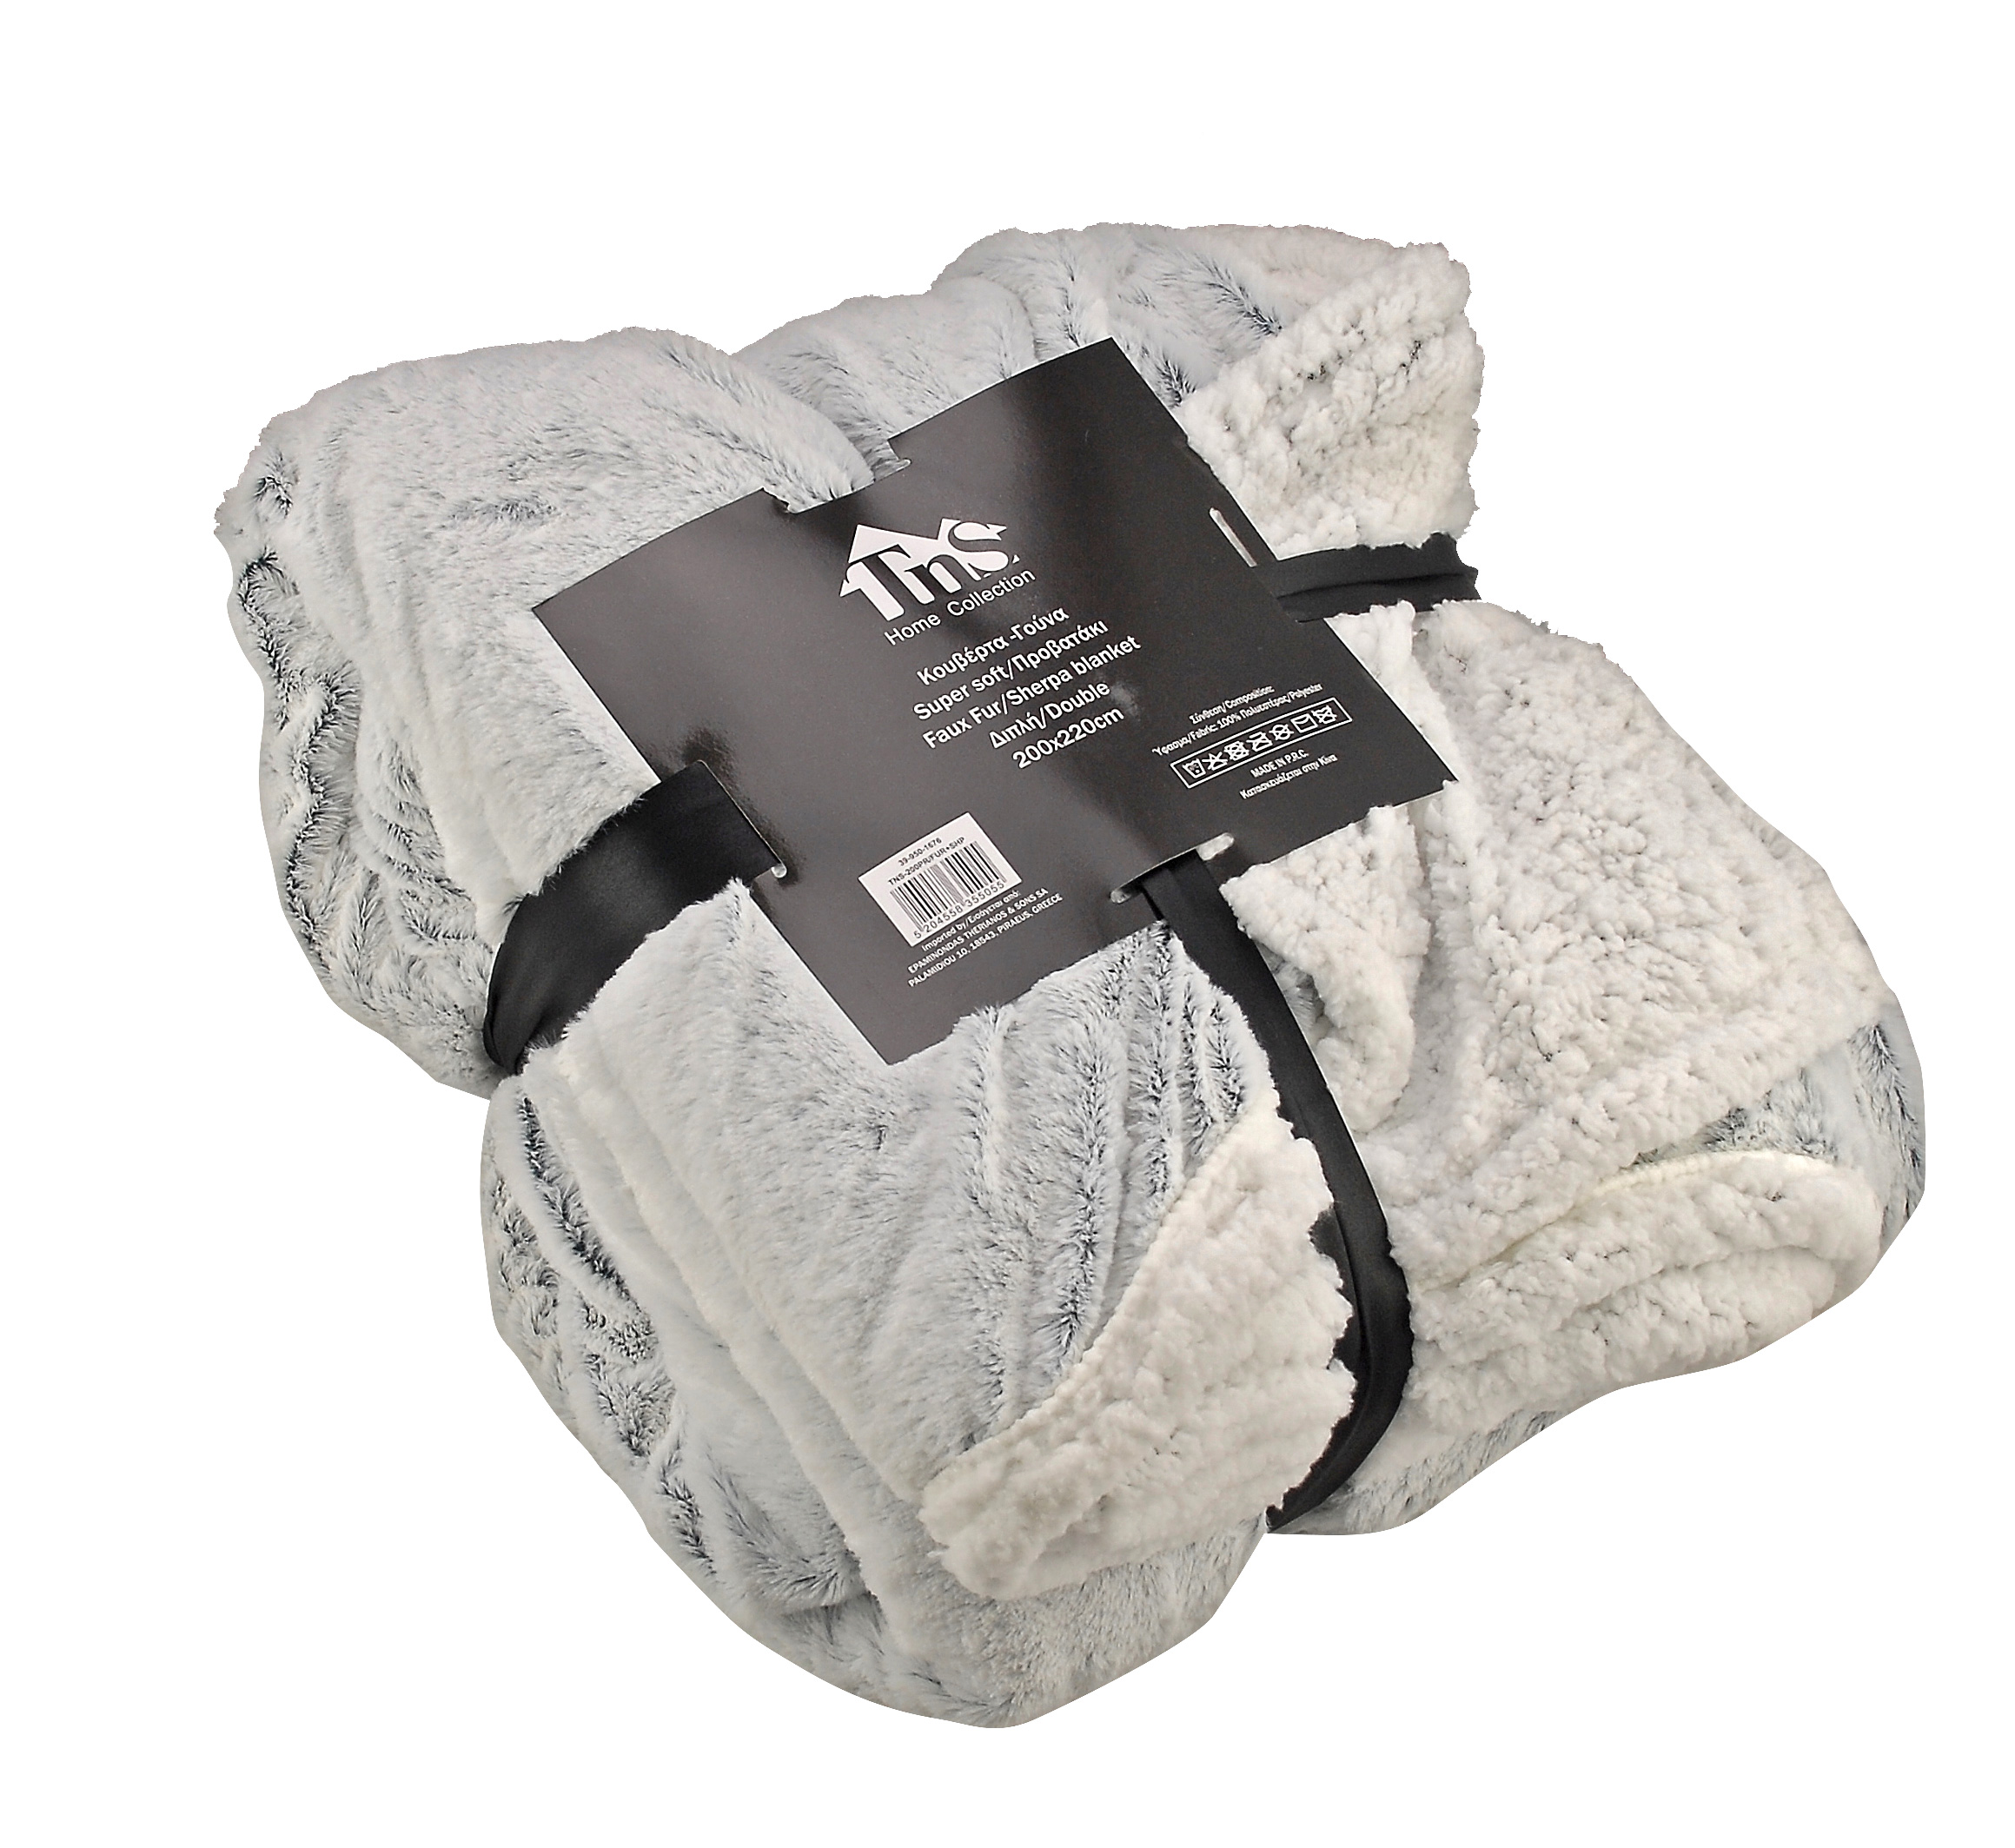 TNS BLANKET SHERPA FLANNEL DOUBLE 200X220CM ASSORTED COLORS